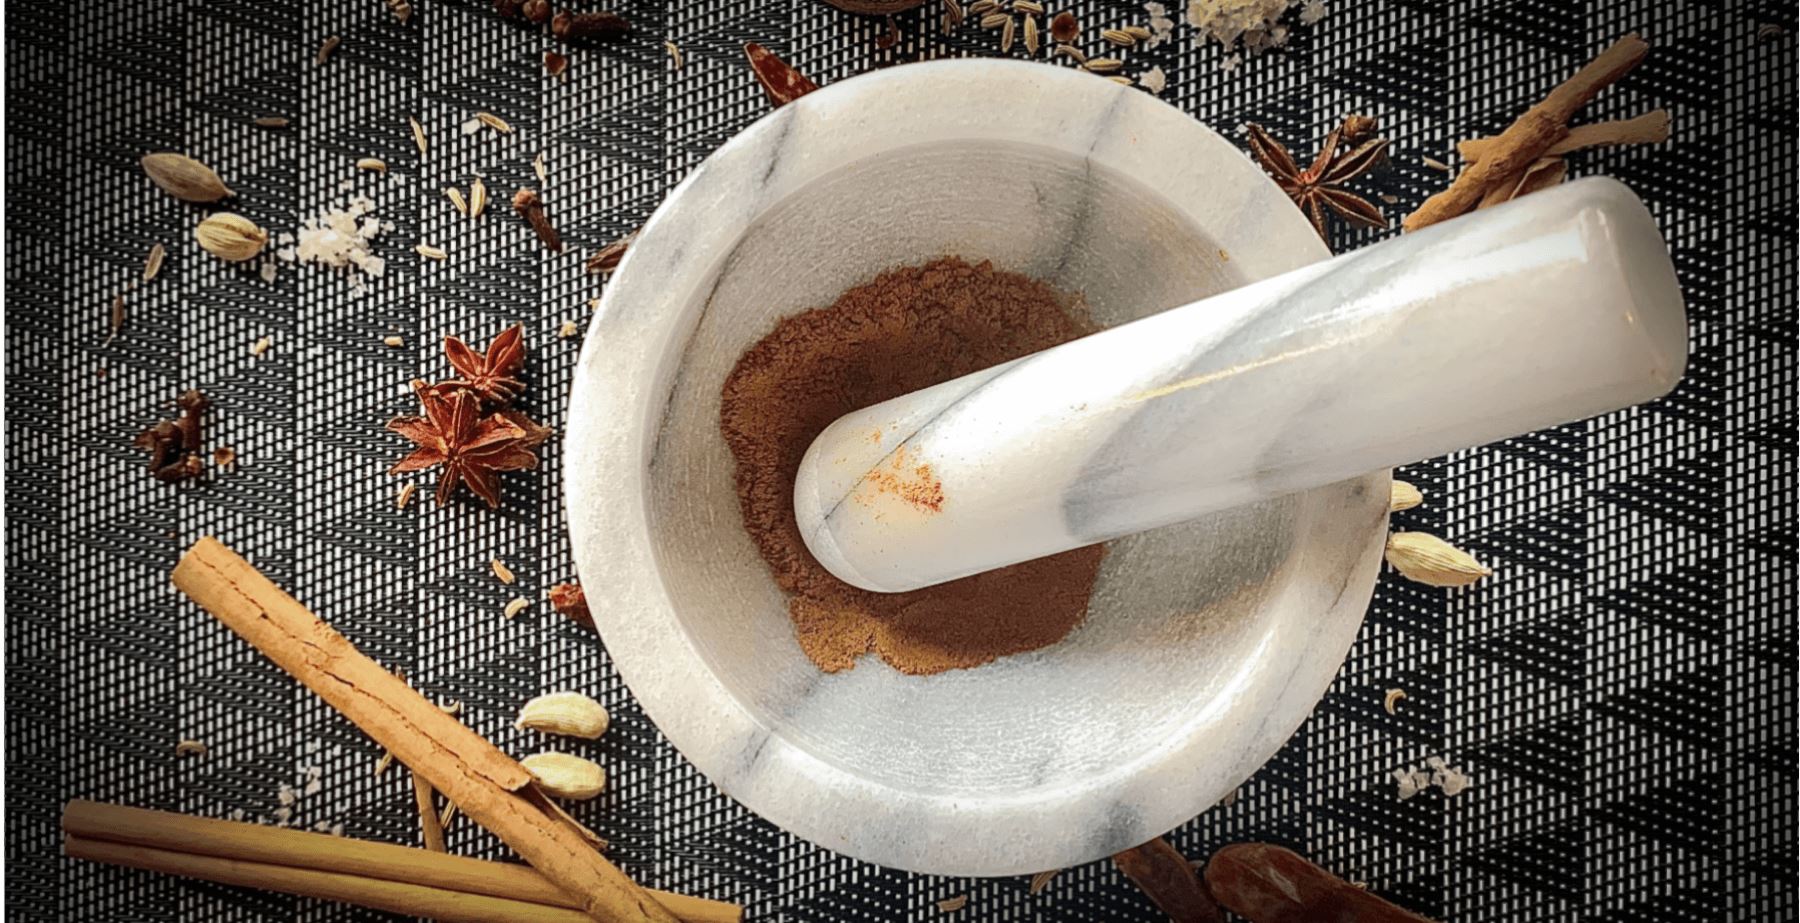 Toasting & Grinding Spices Recipe - The Spice House